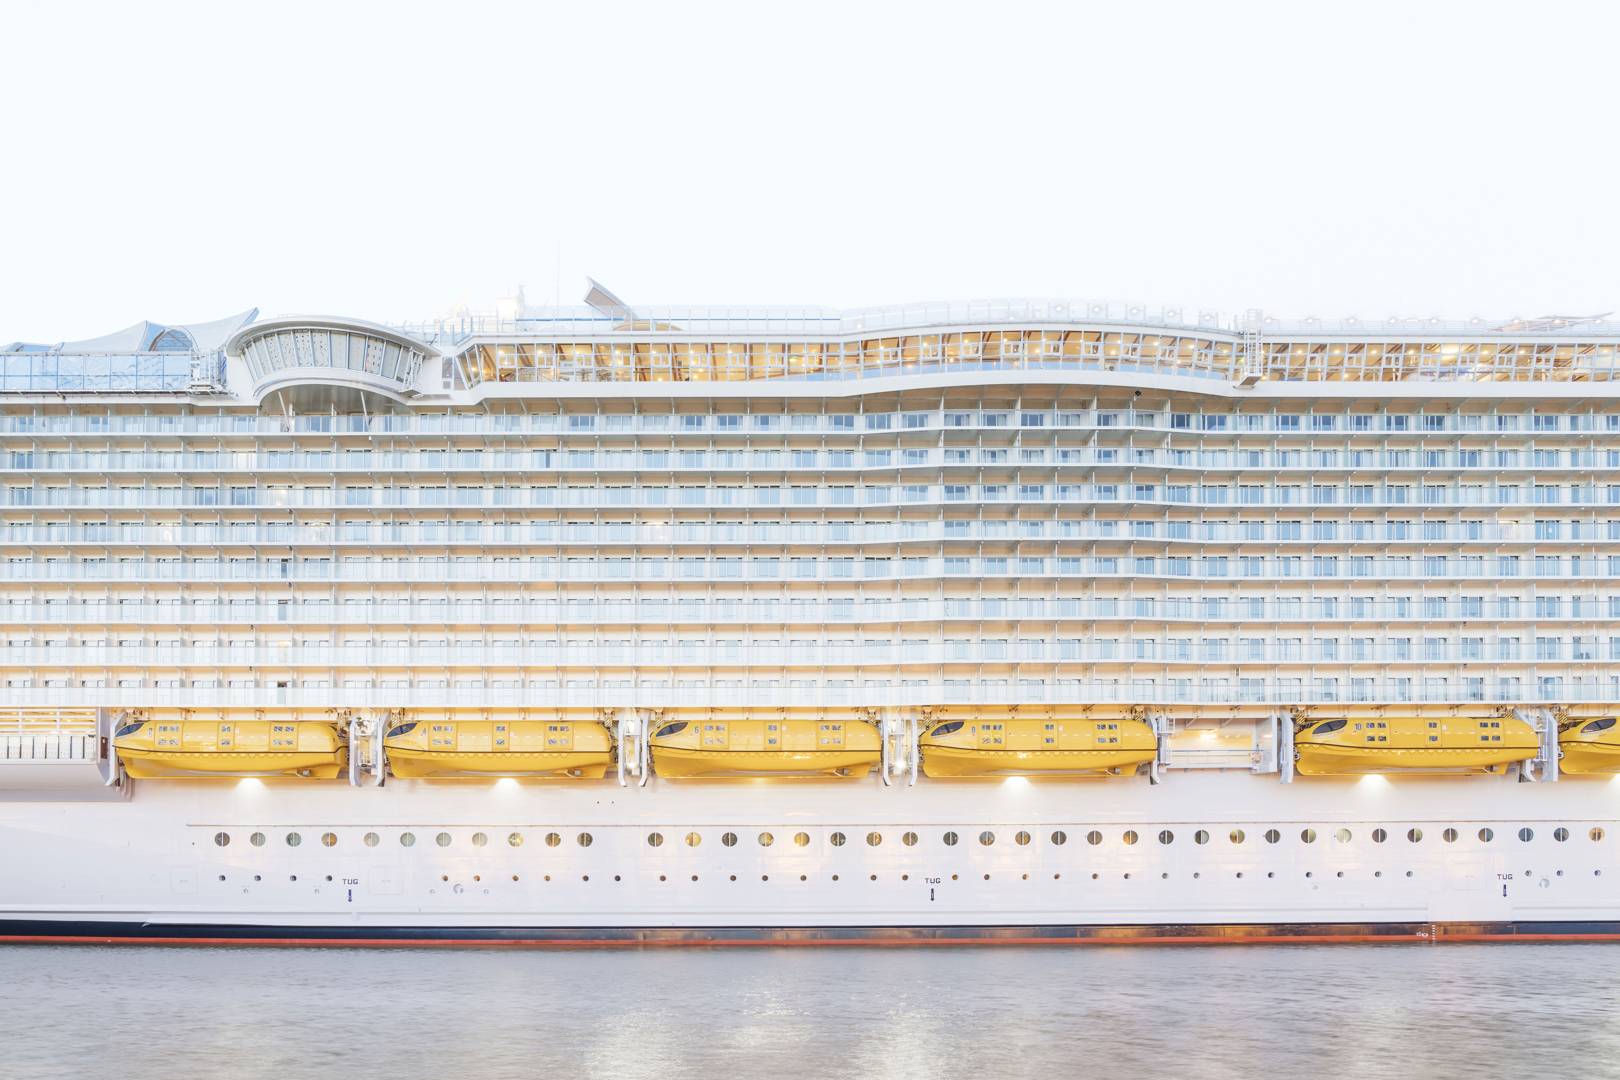 The dizzying story of Symphony of the Seas, the largest and most